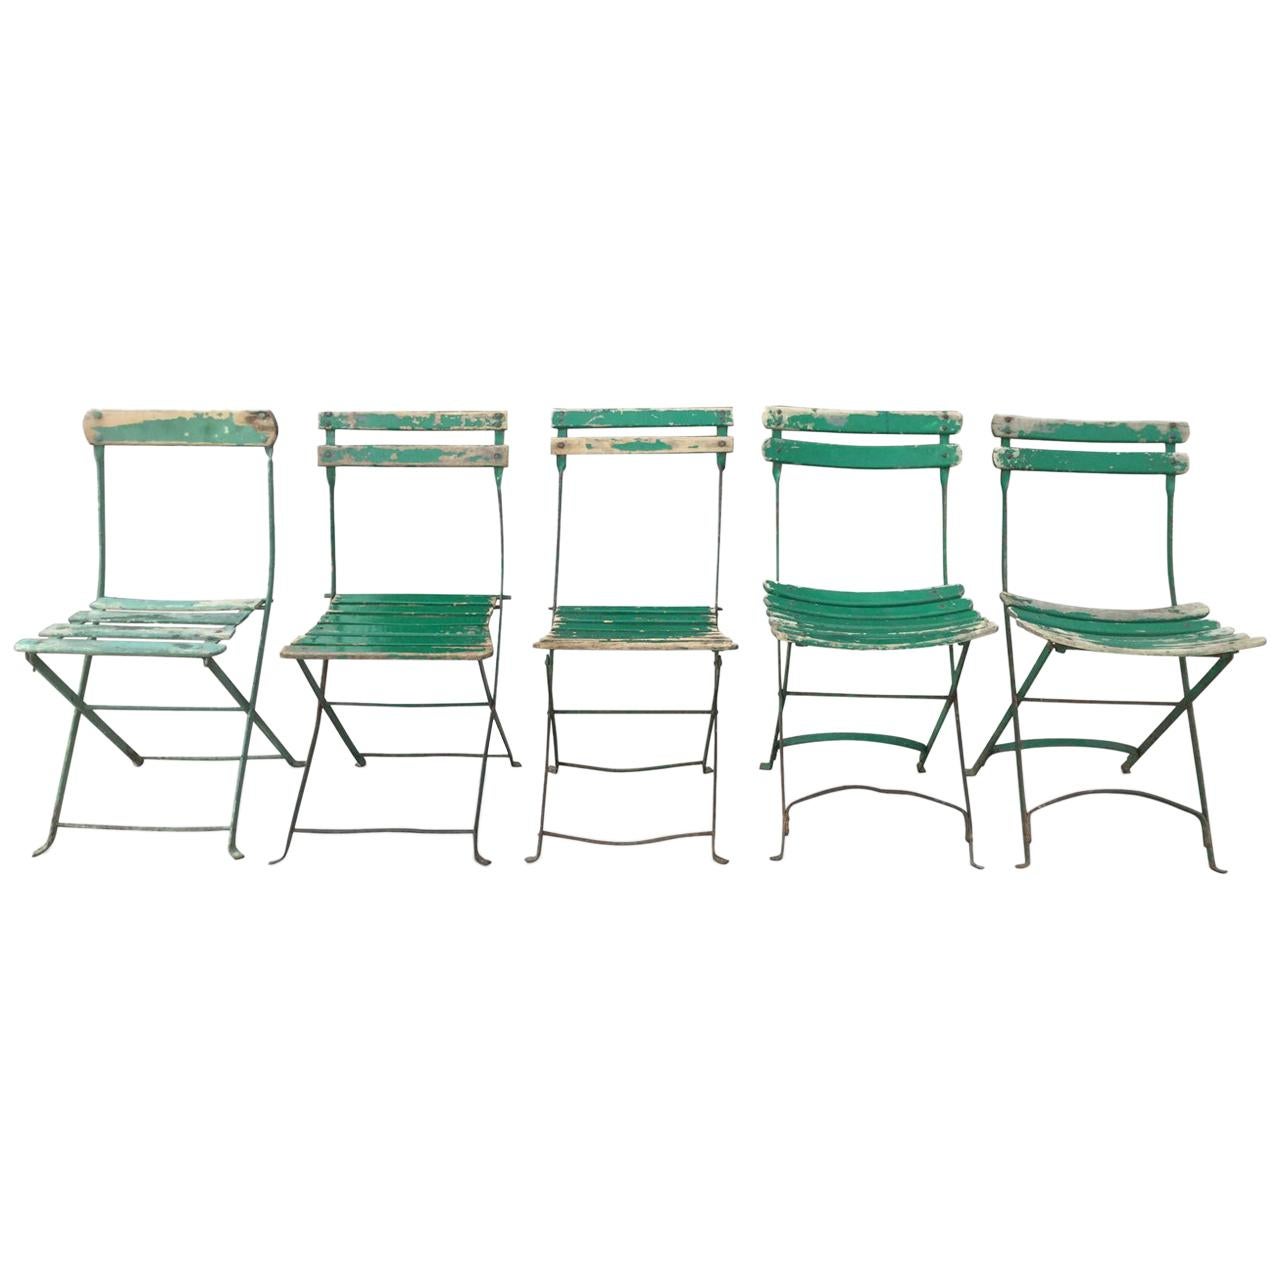 French Outdoor Folding Garden Chairs